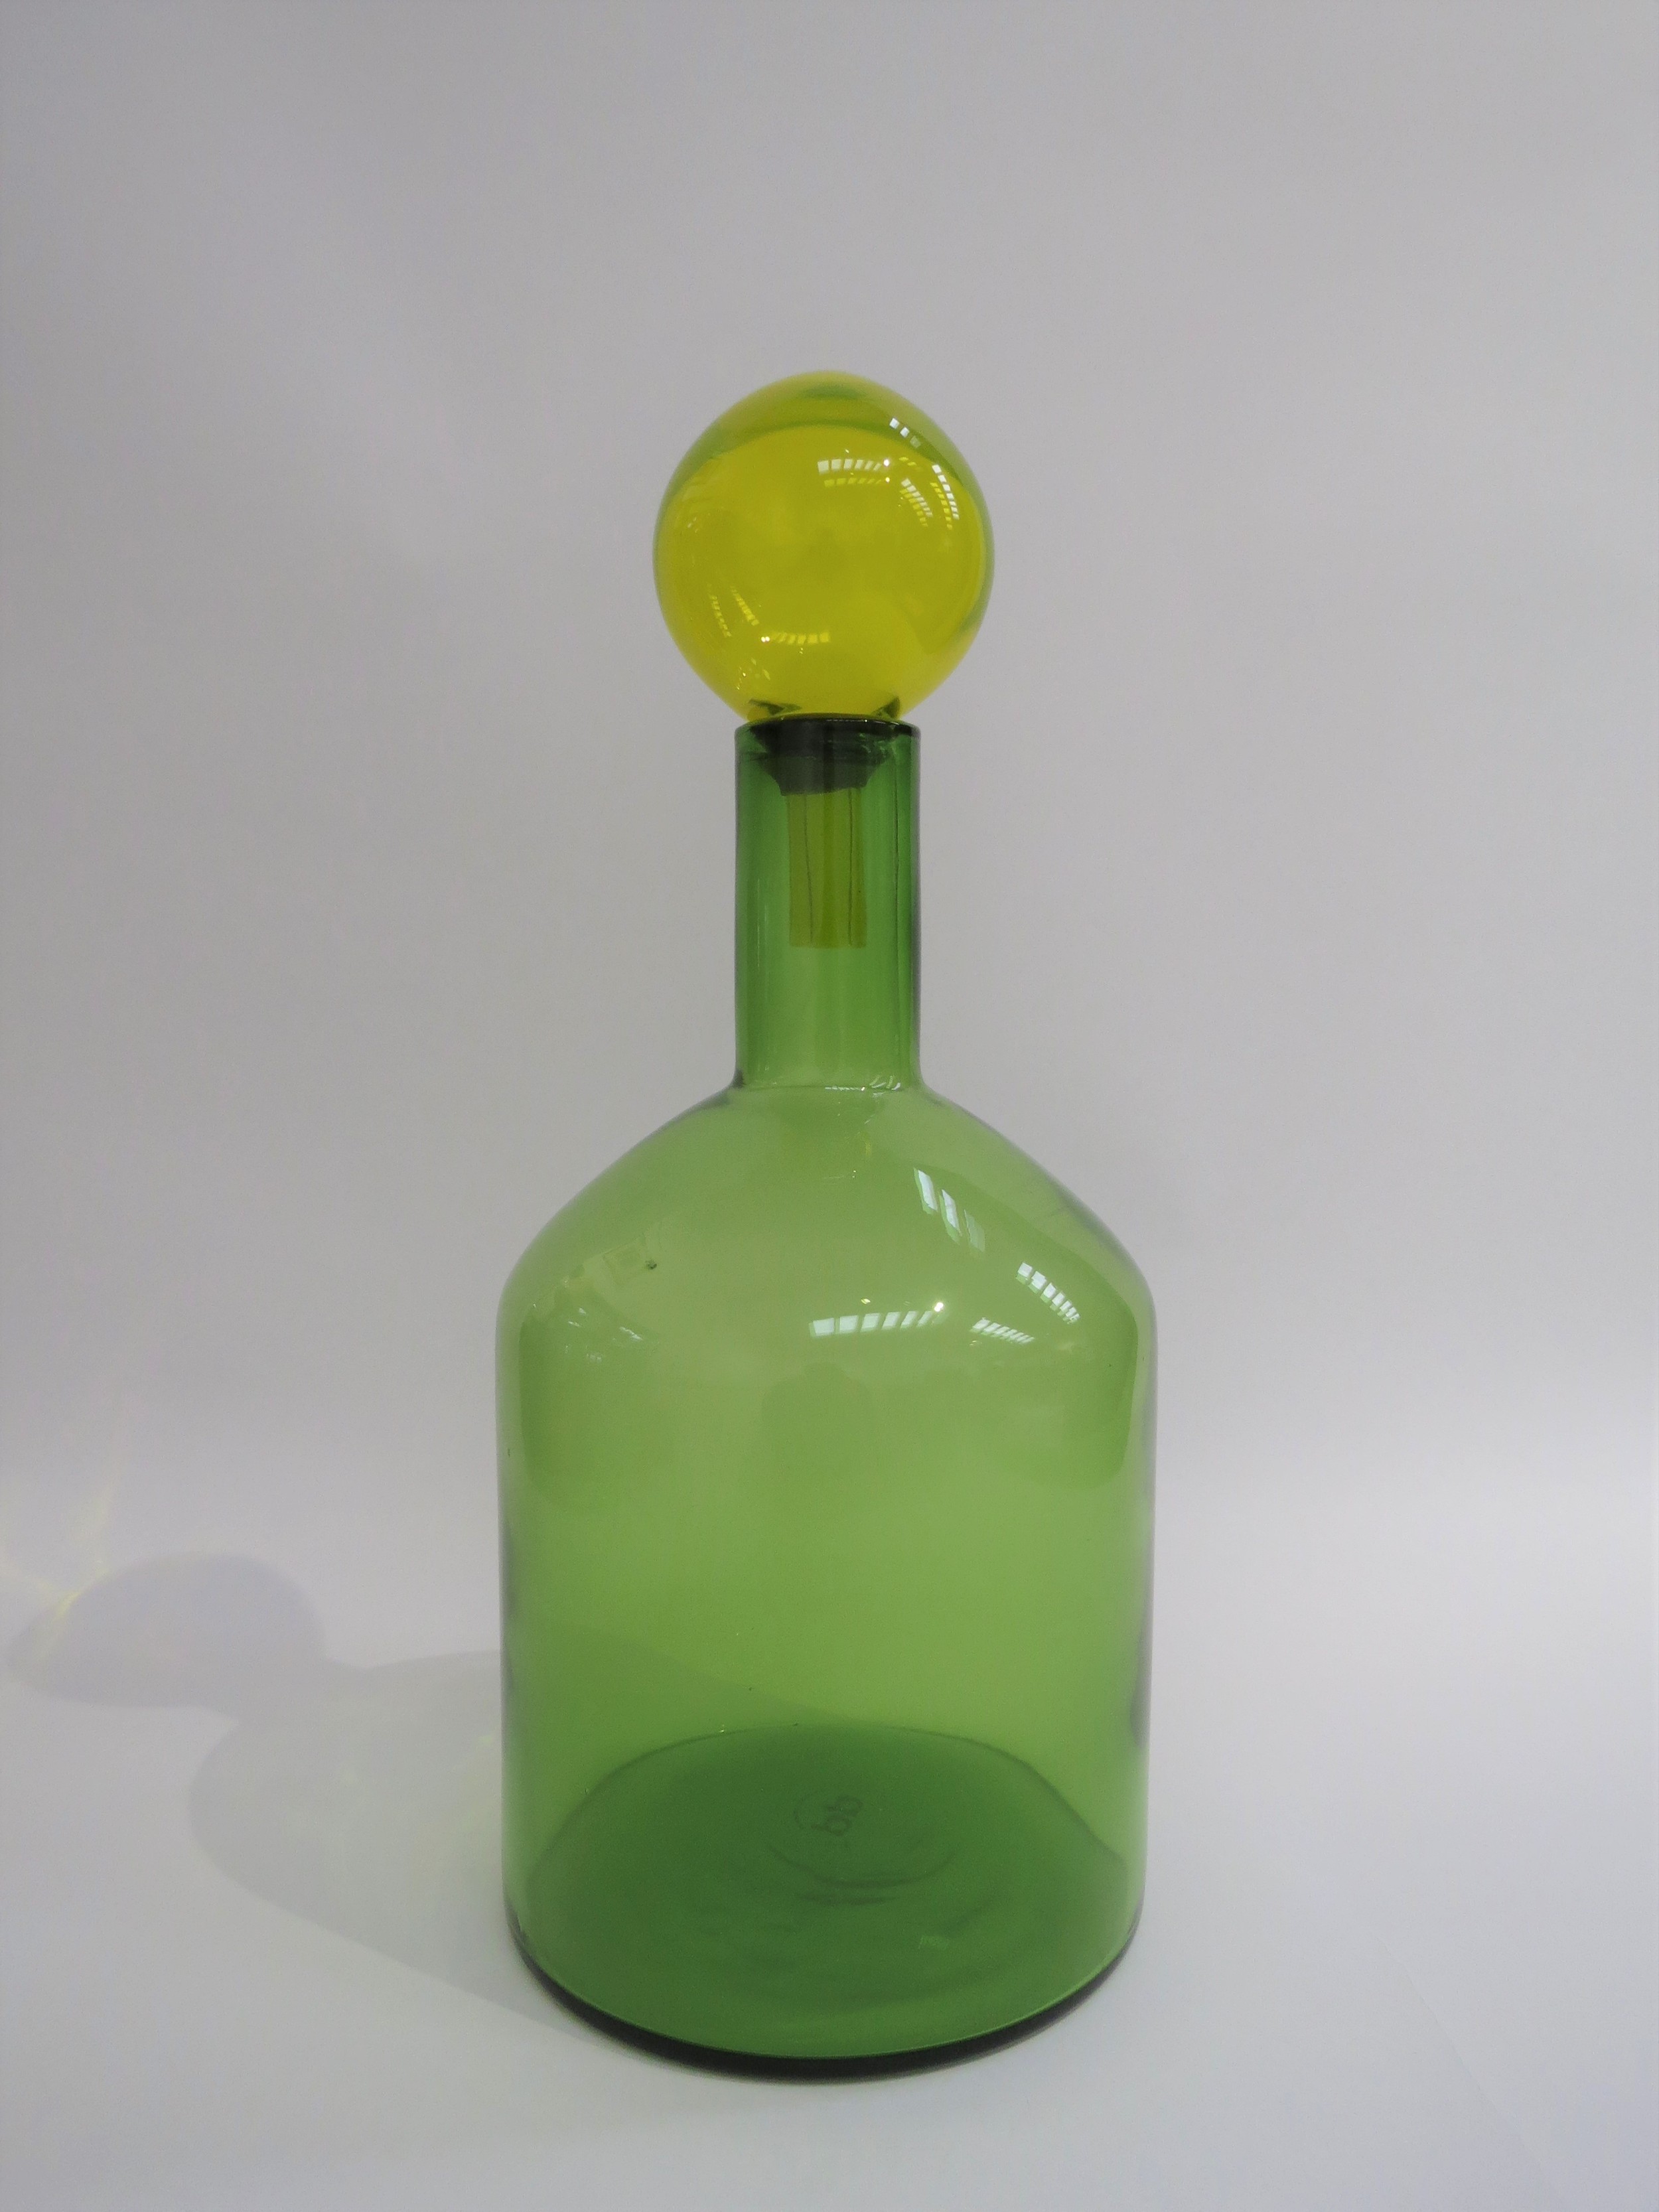 A Dutch Polspotton Glass bottle vase in green with a yellow glass stopper. 42cm high - Image 2 of 3